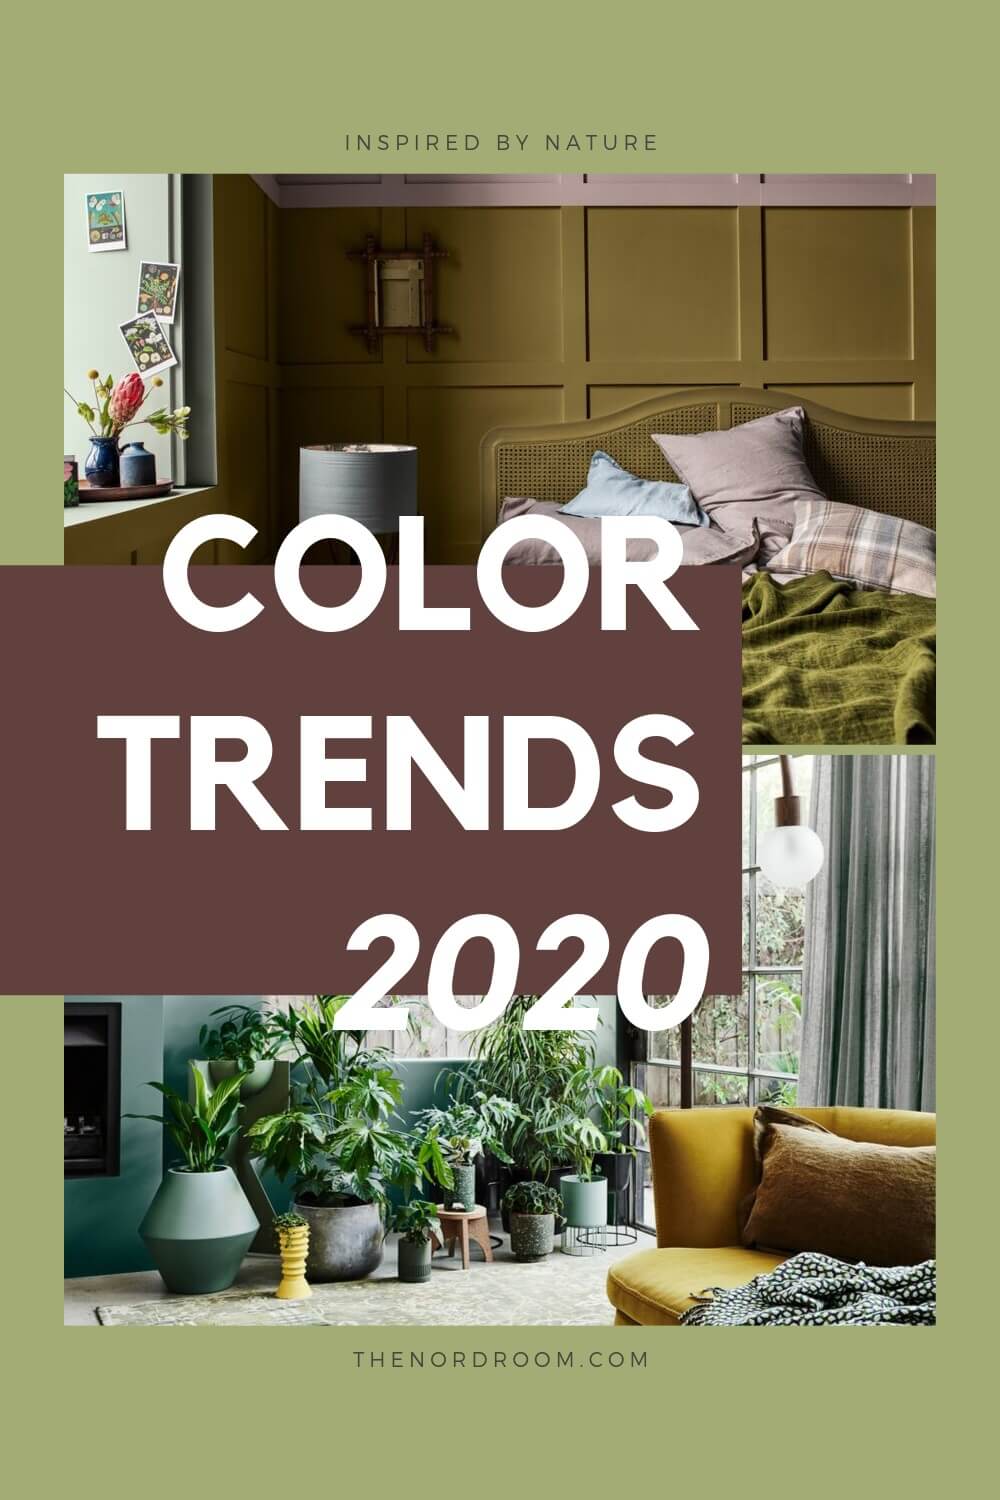 The Color Trends For 2020 Are Inspired by Nature